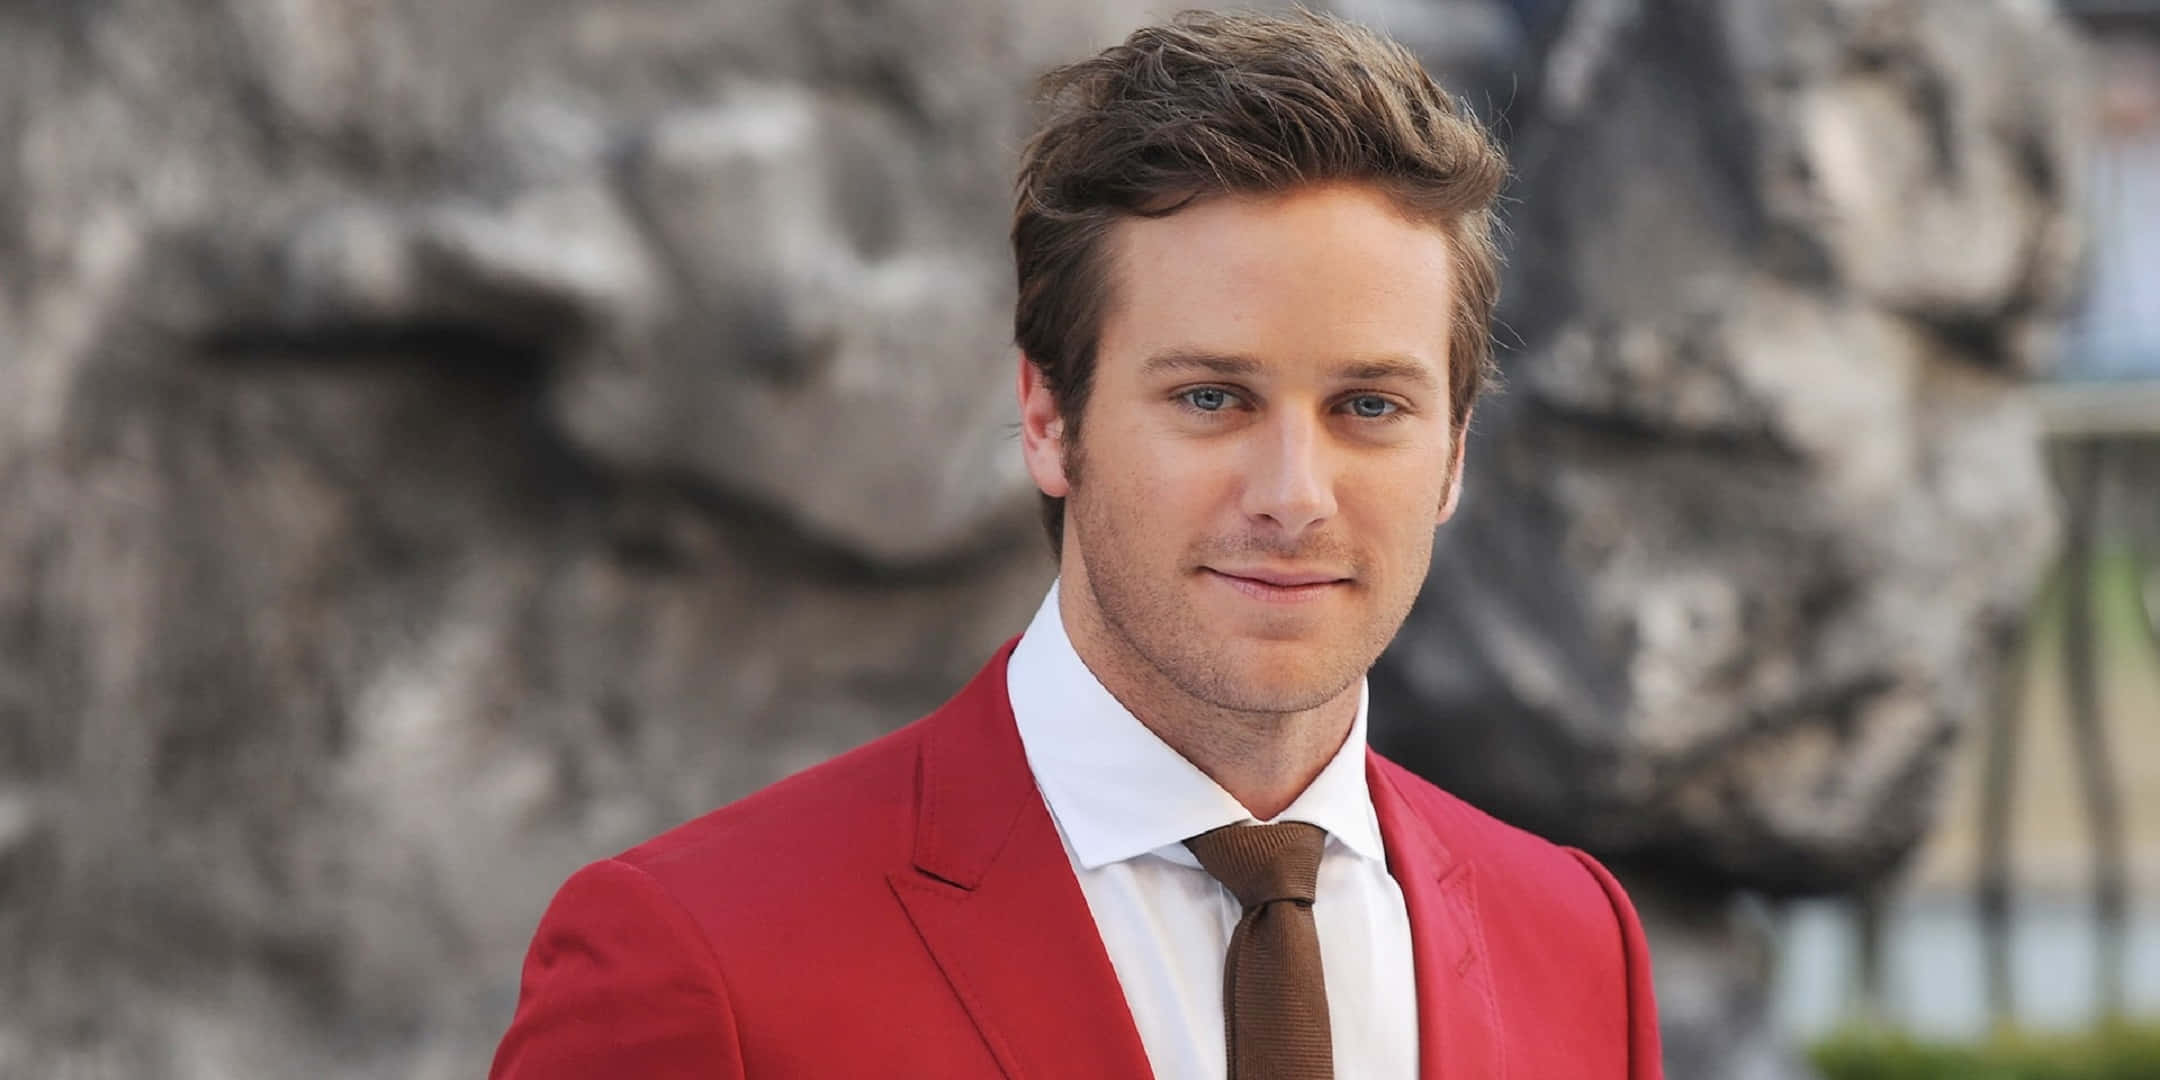 Armie Hammer looks dashing at the Golden Globes